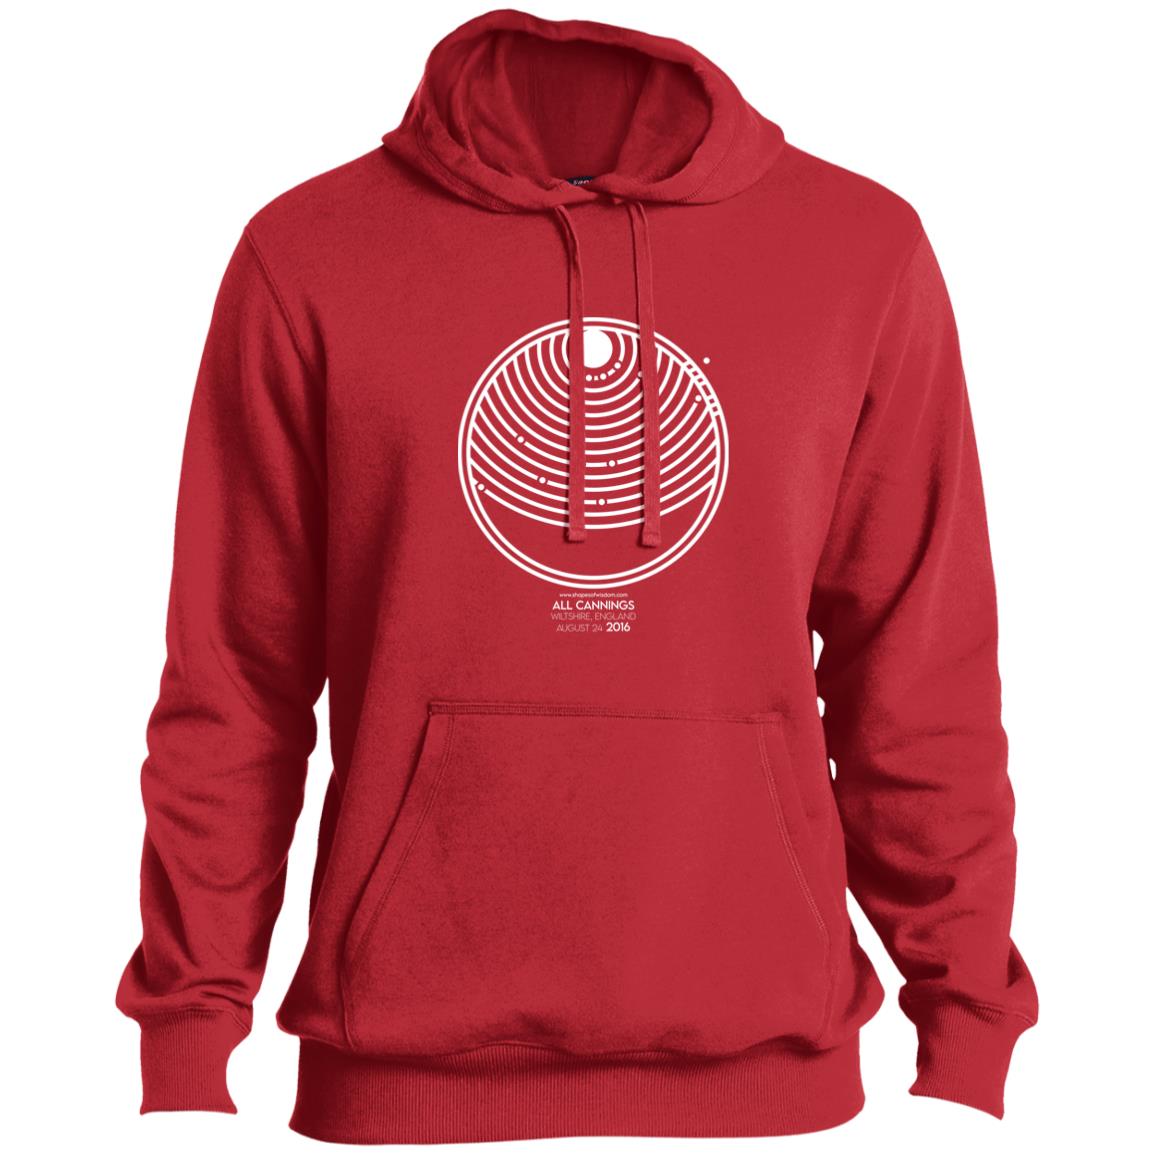 Crop Circle Pullover Hoodie - All Cannings 5